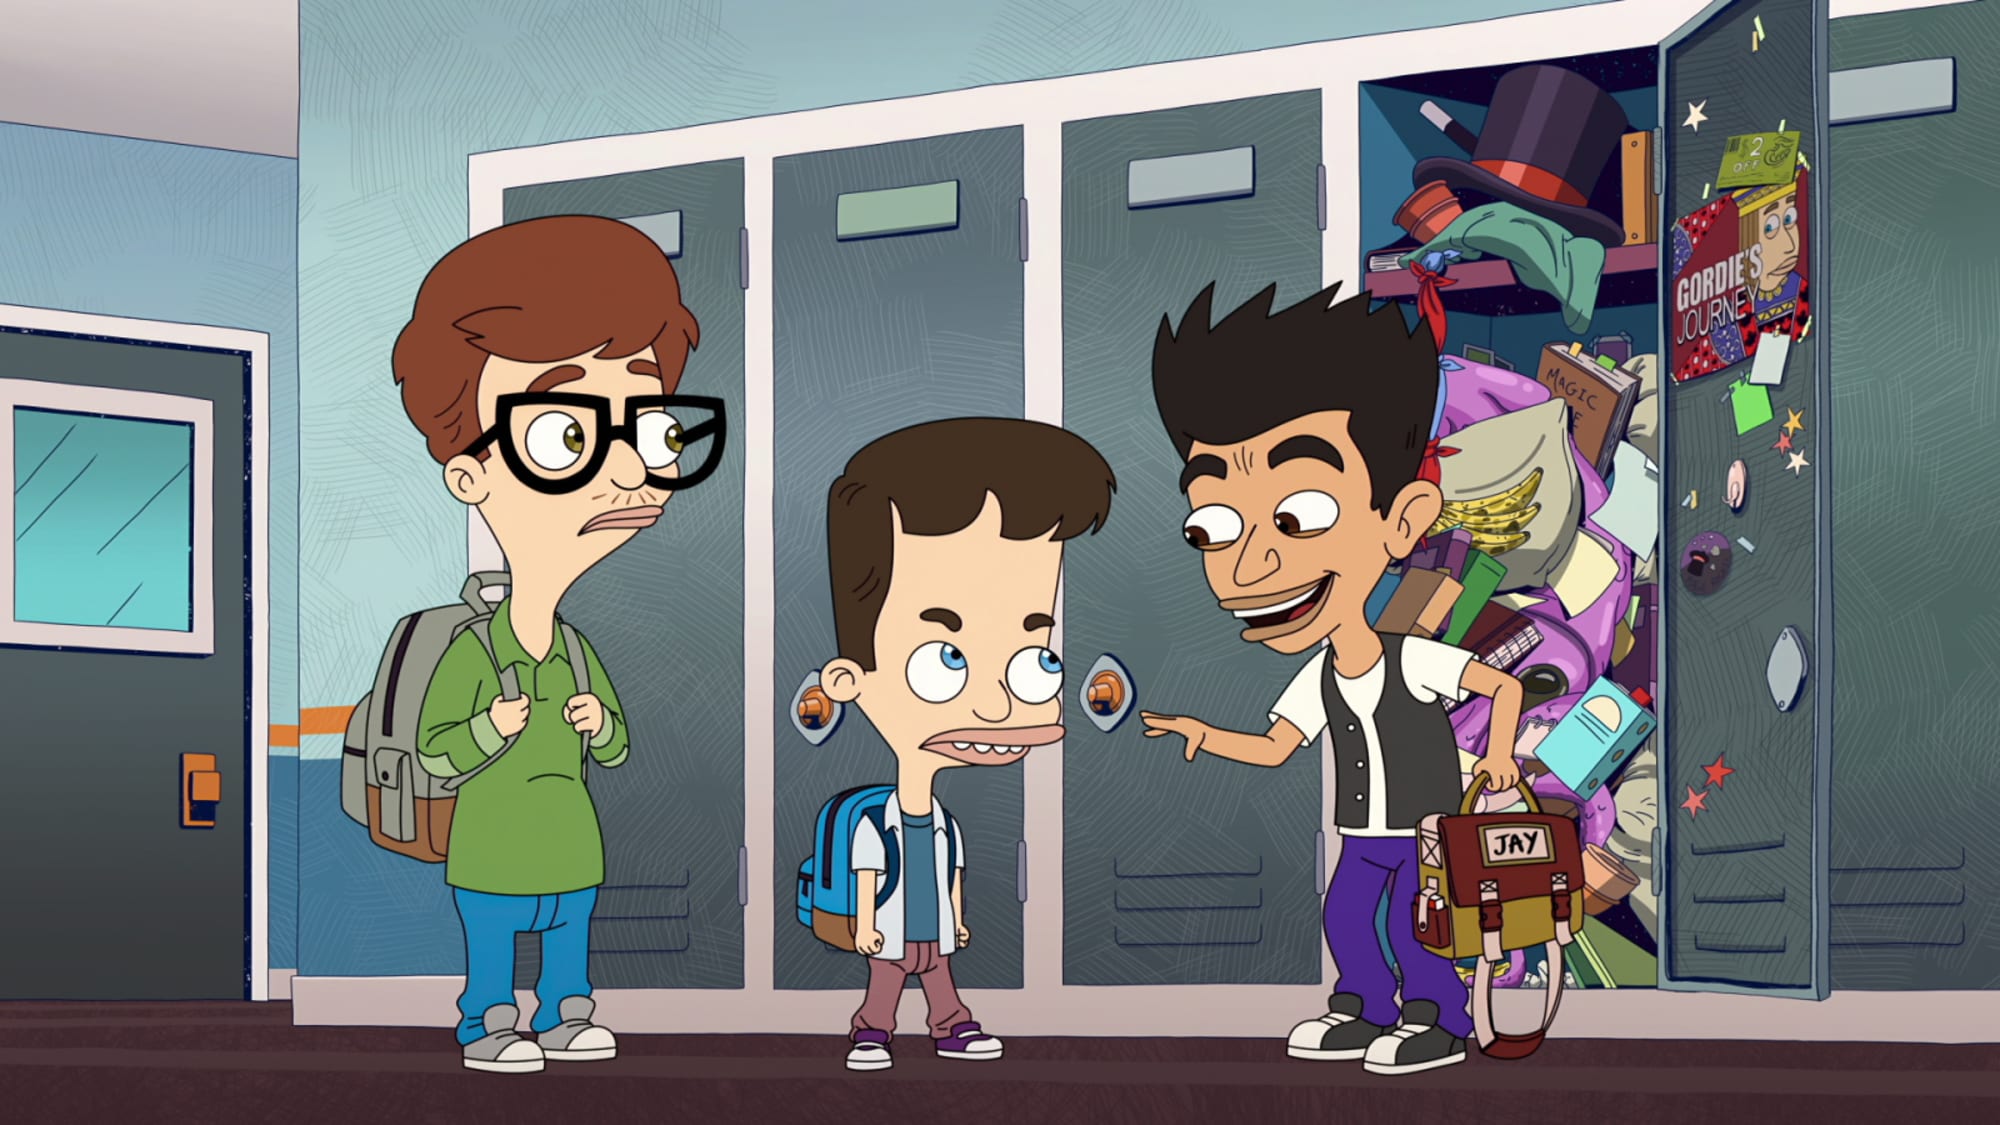 Big Mouth Season 7 Release Date Revealed! Get Ready for More Awkward Puberty Moments 16